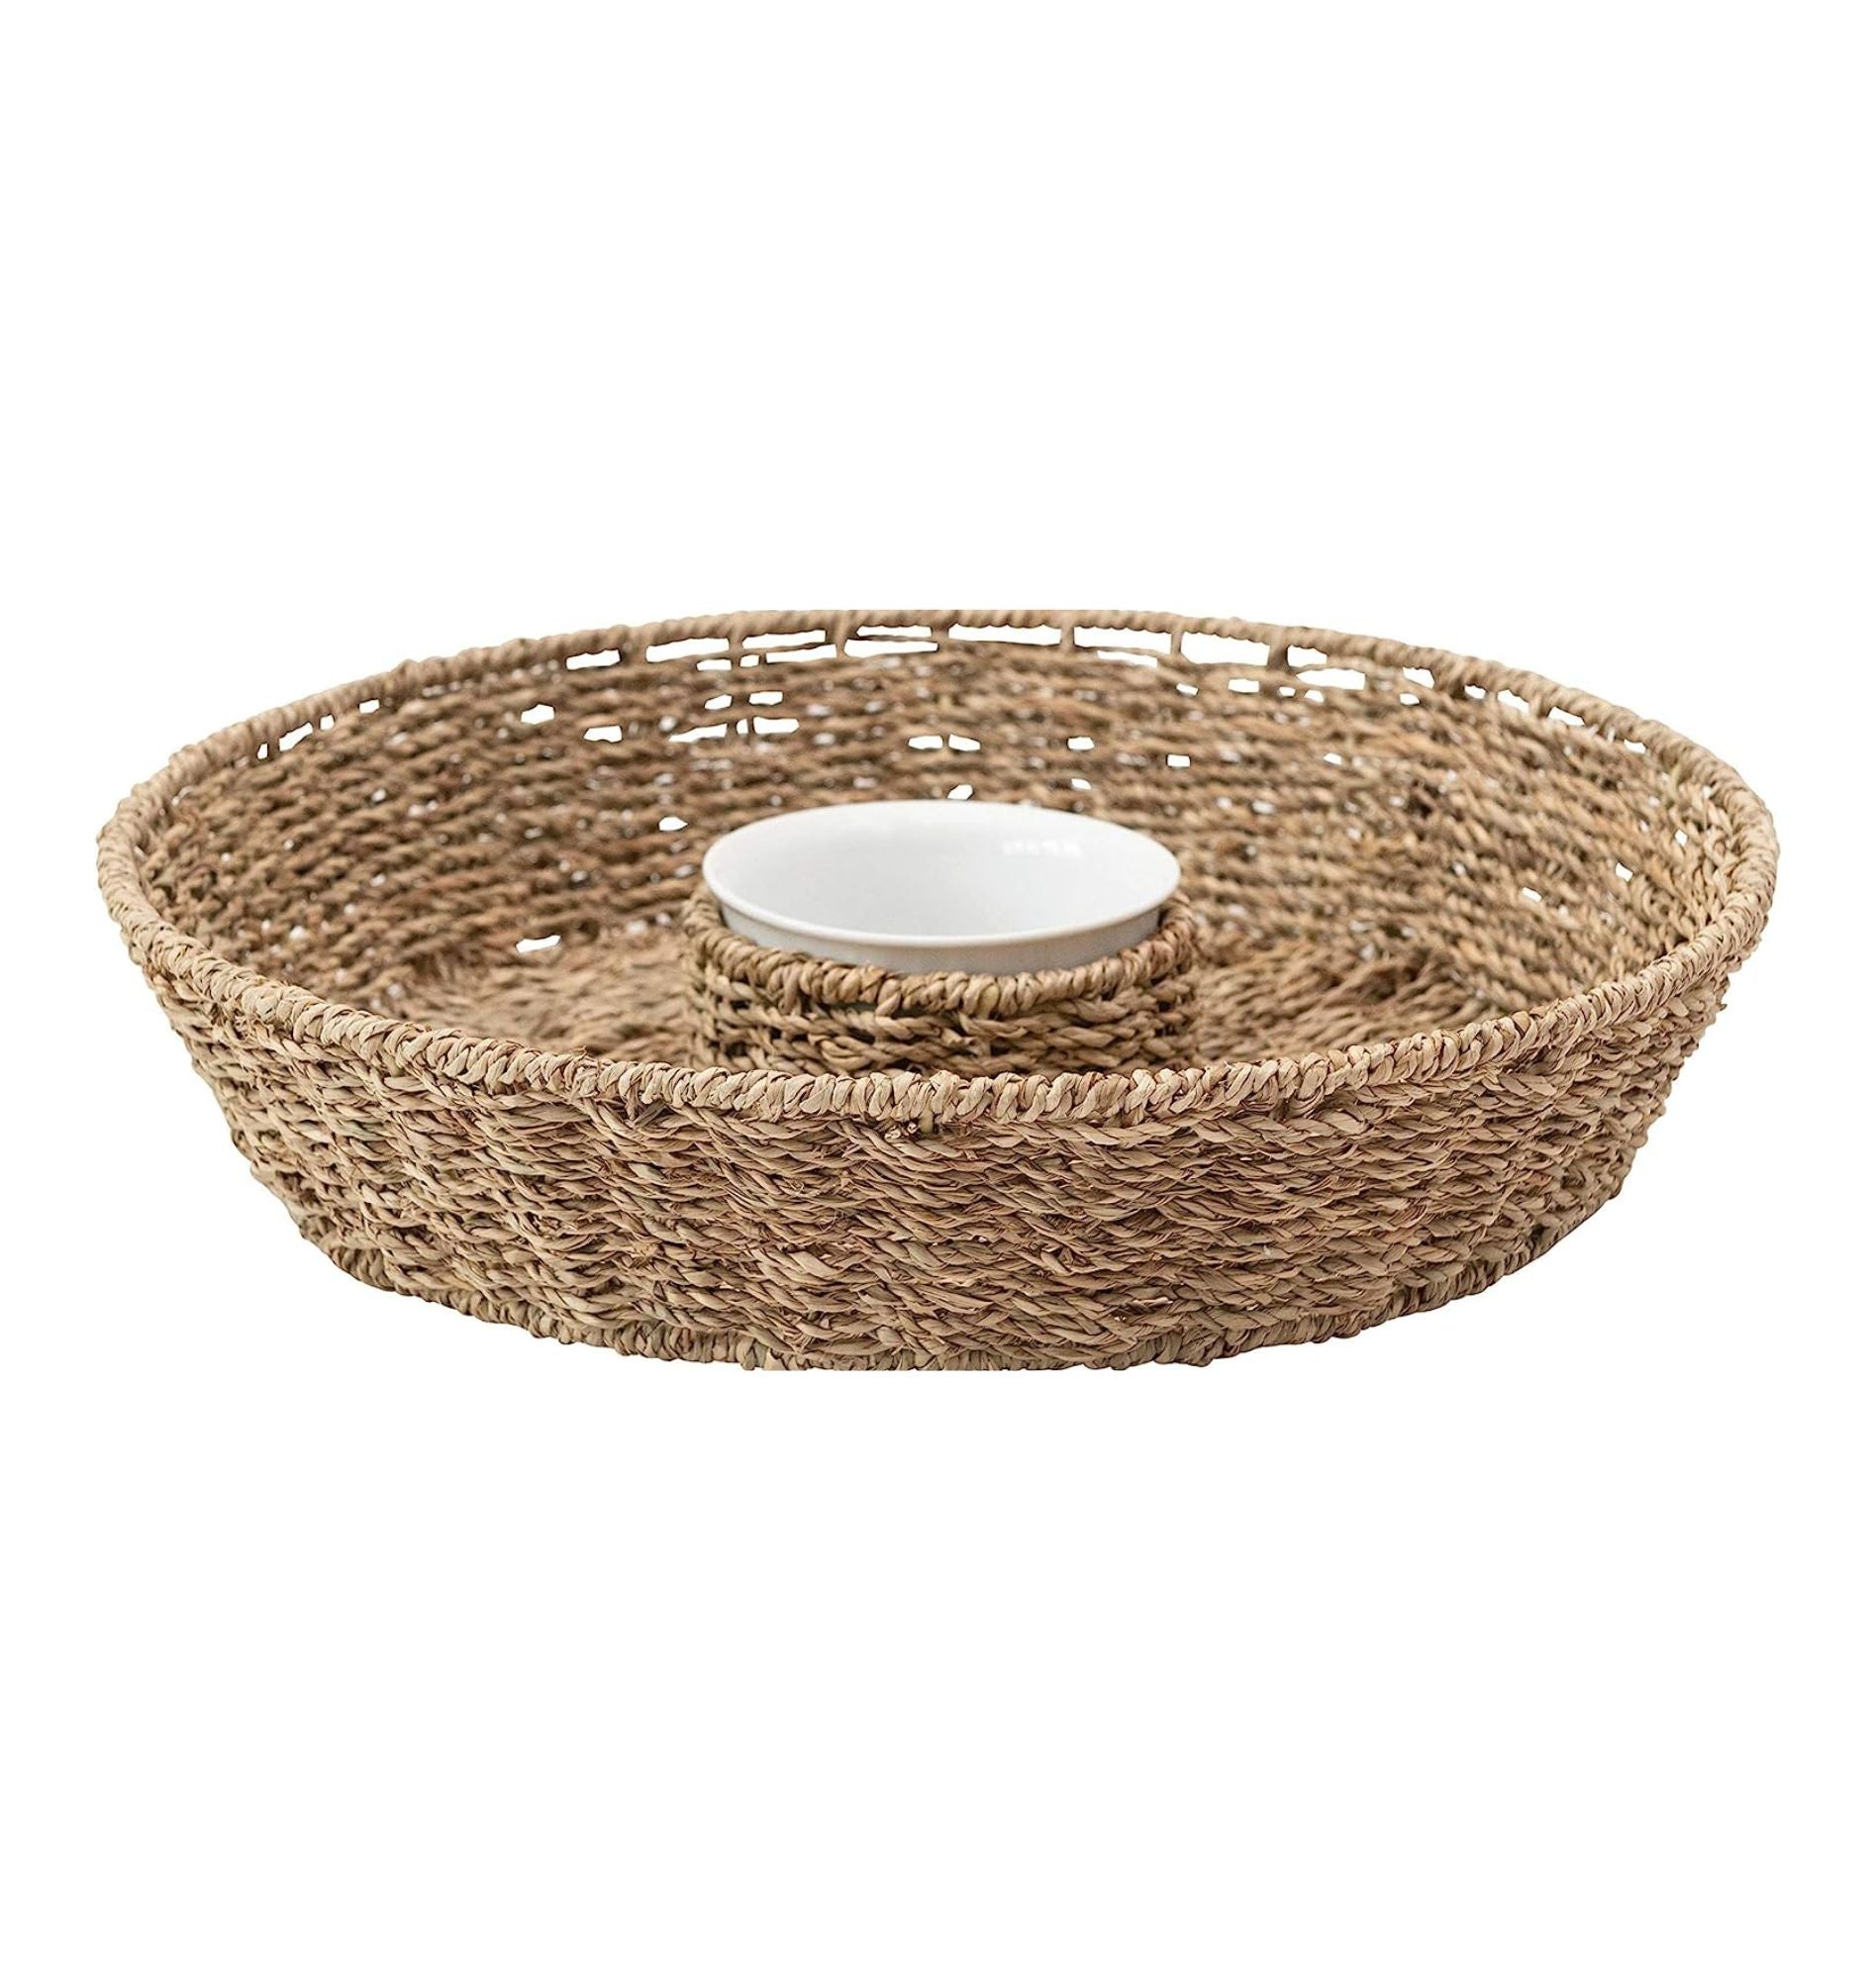 Seagrass Chip and Dip Basket Set